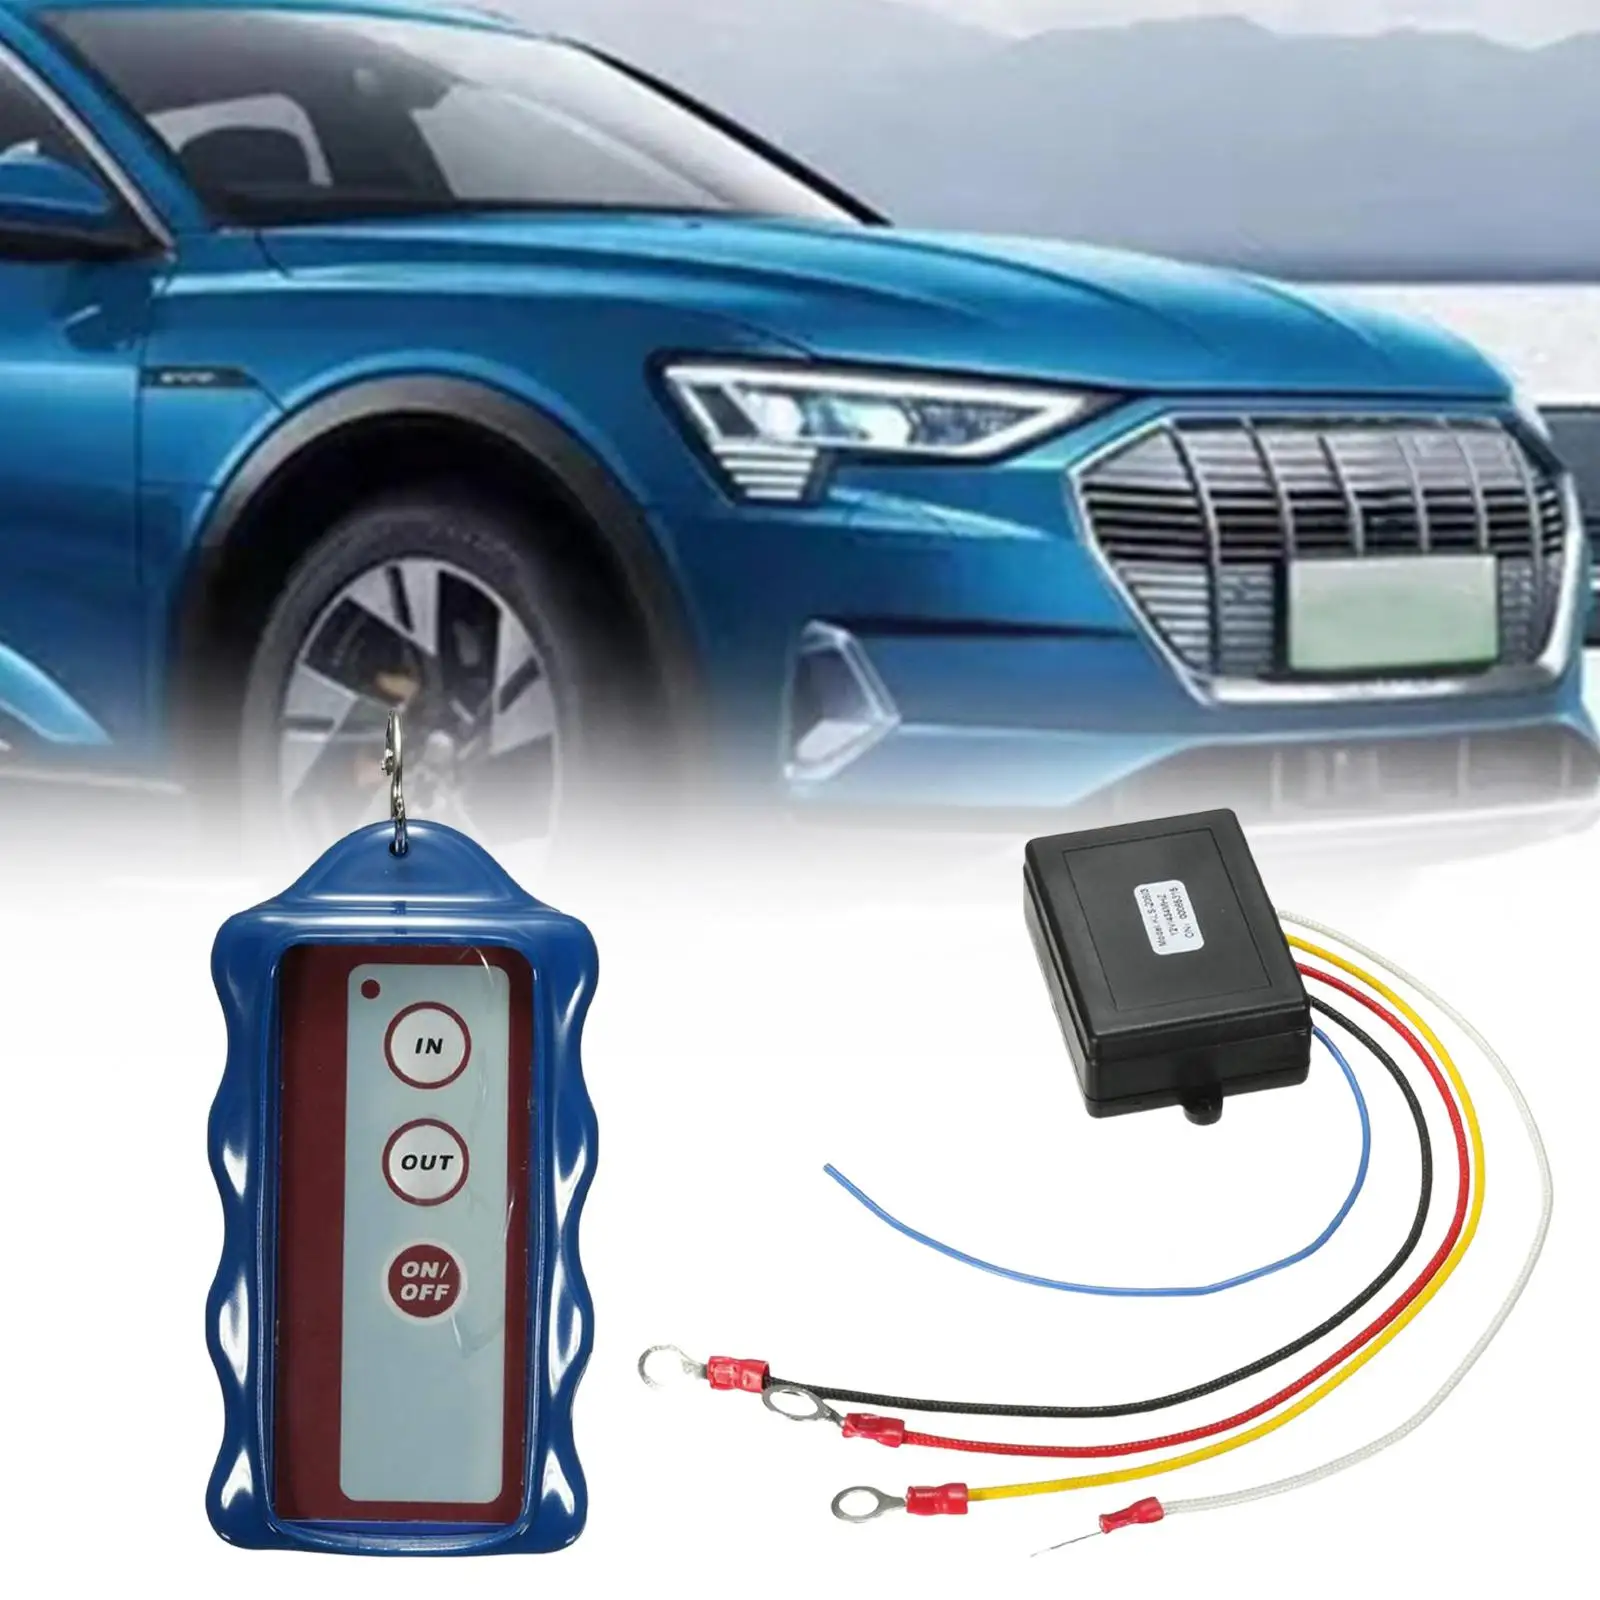 Wireless Winch Remote Control 30M Control Distance Spare Parts Five Different Colors Wires Winch Switch for Vehicle Trailer